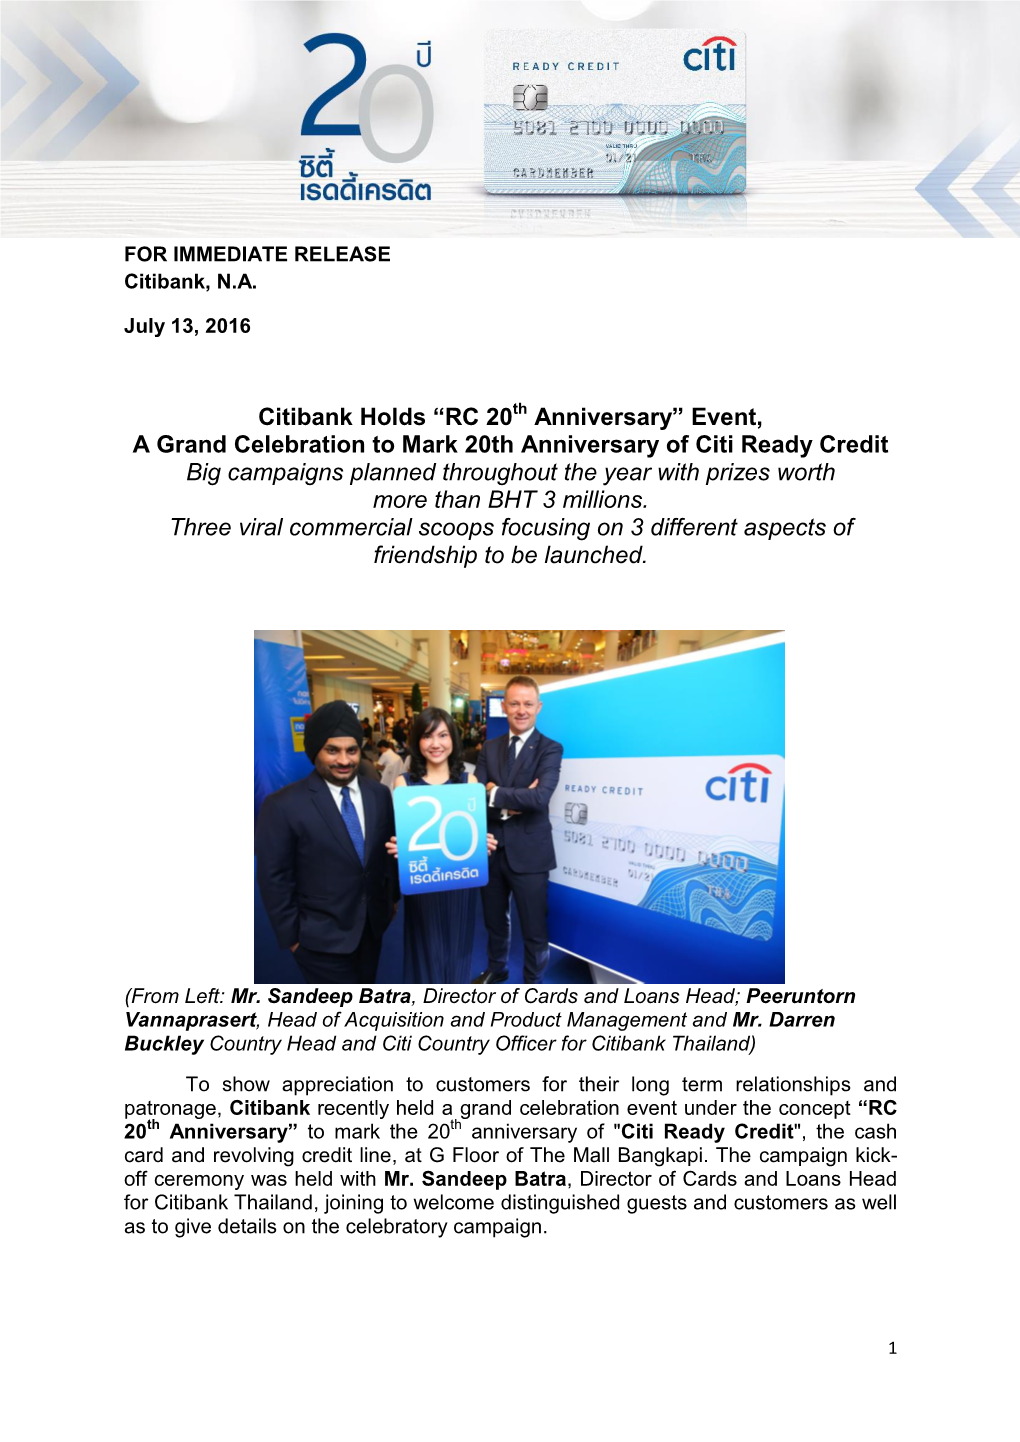 Event, a Grand Celebration to Mark 20Th Anniversary of Citi Ready Credit Big Campaigns Planned Throughout the Year with Prizes Worth More Than BHT 3 Millions